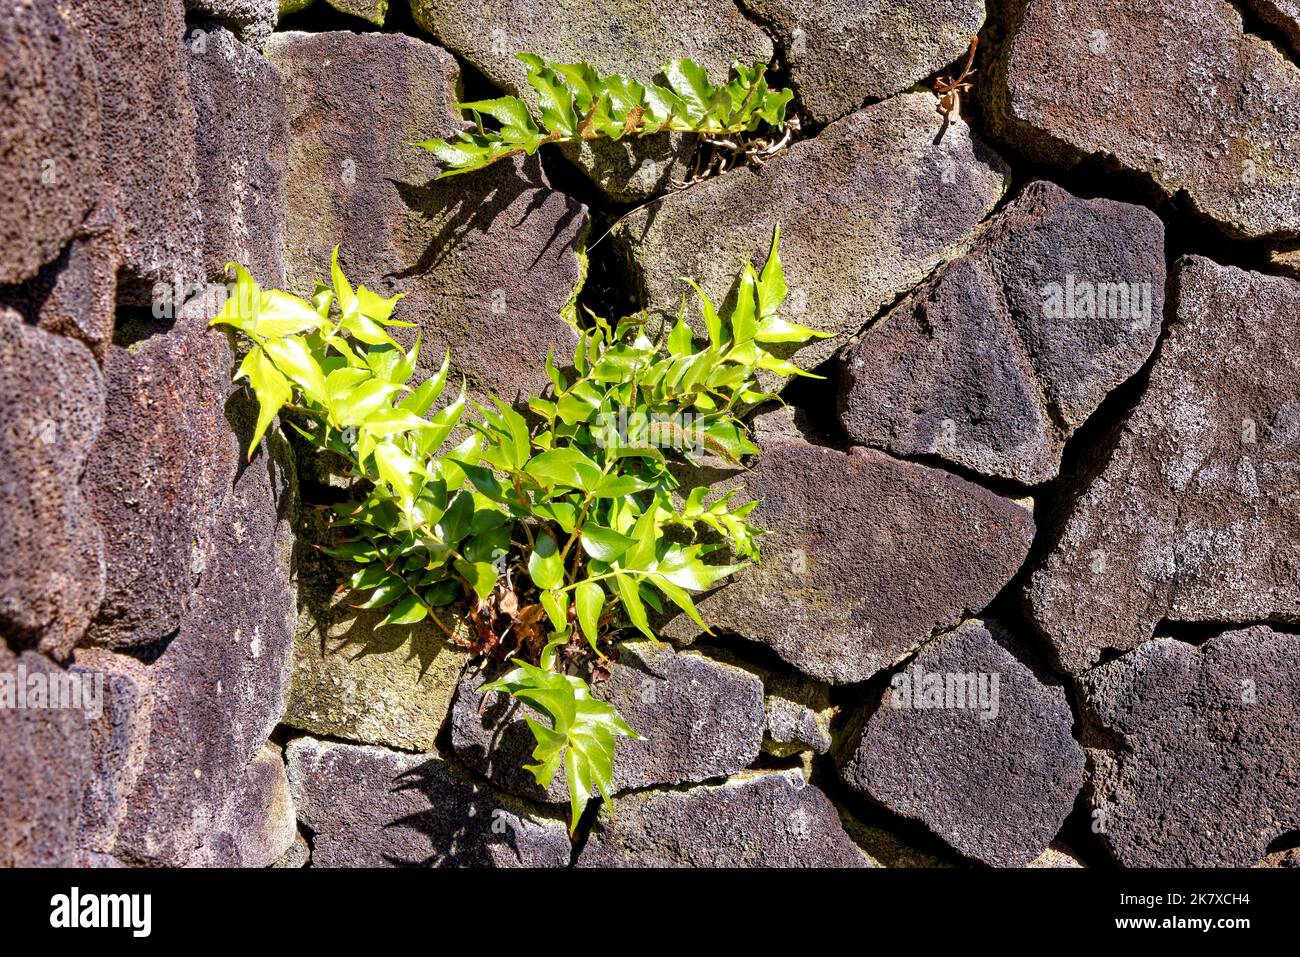 Stone wall made from volcanic rock in Lanzarote. Close-up shot of dry stone wall made of volcanic rocks background Stock Photo